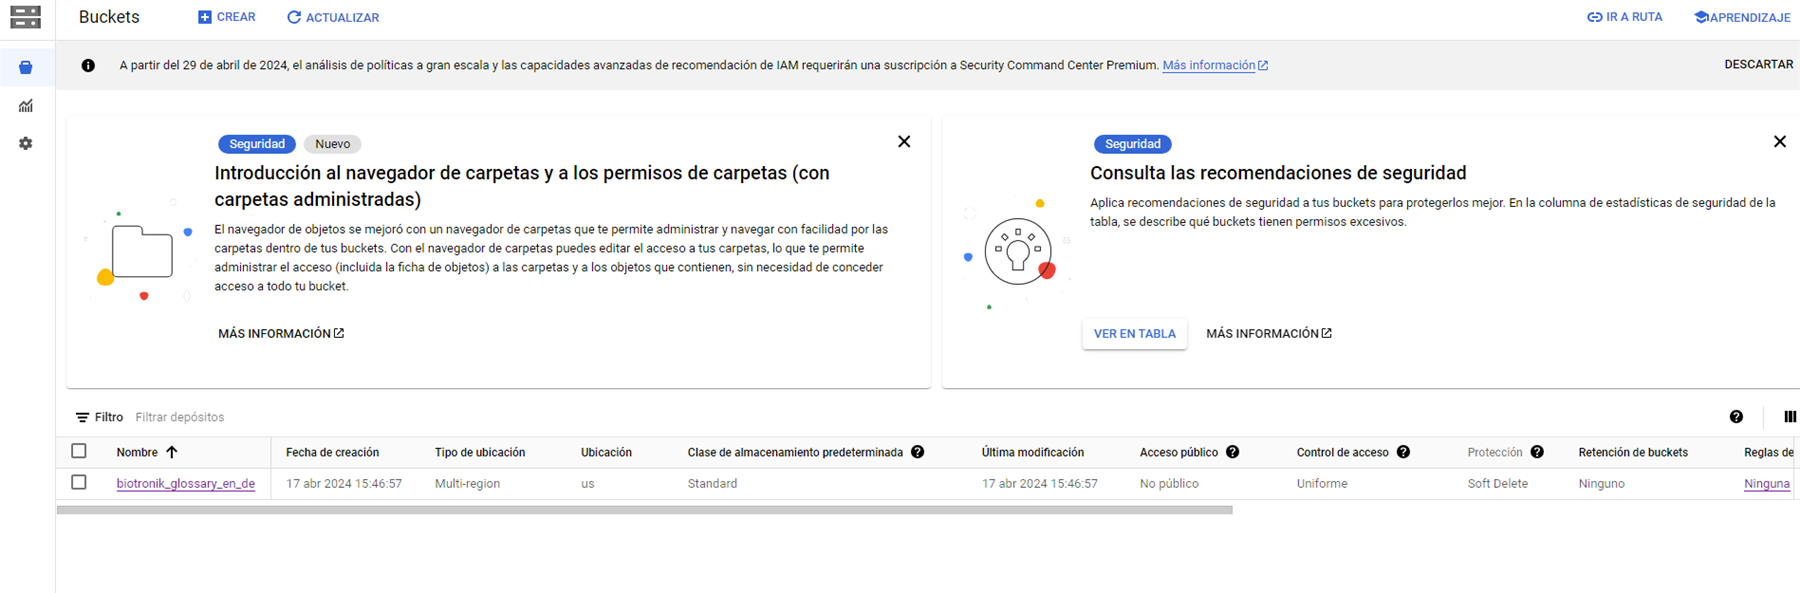 Google Cloud console screenshot with security recommendations pop-up and a list of buckets, one named 'biotronik_glossary_en_de' with no public access.